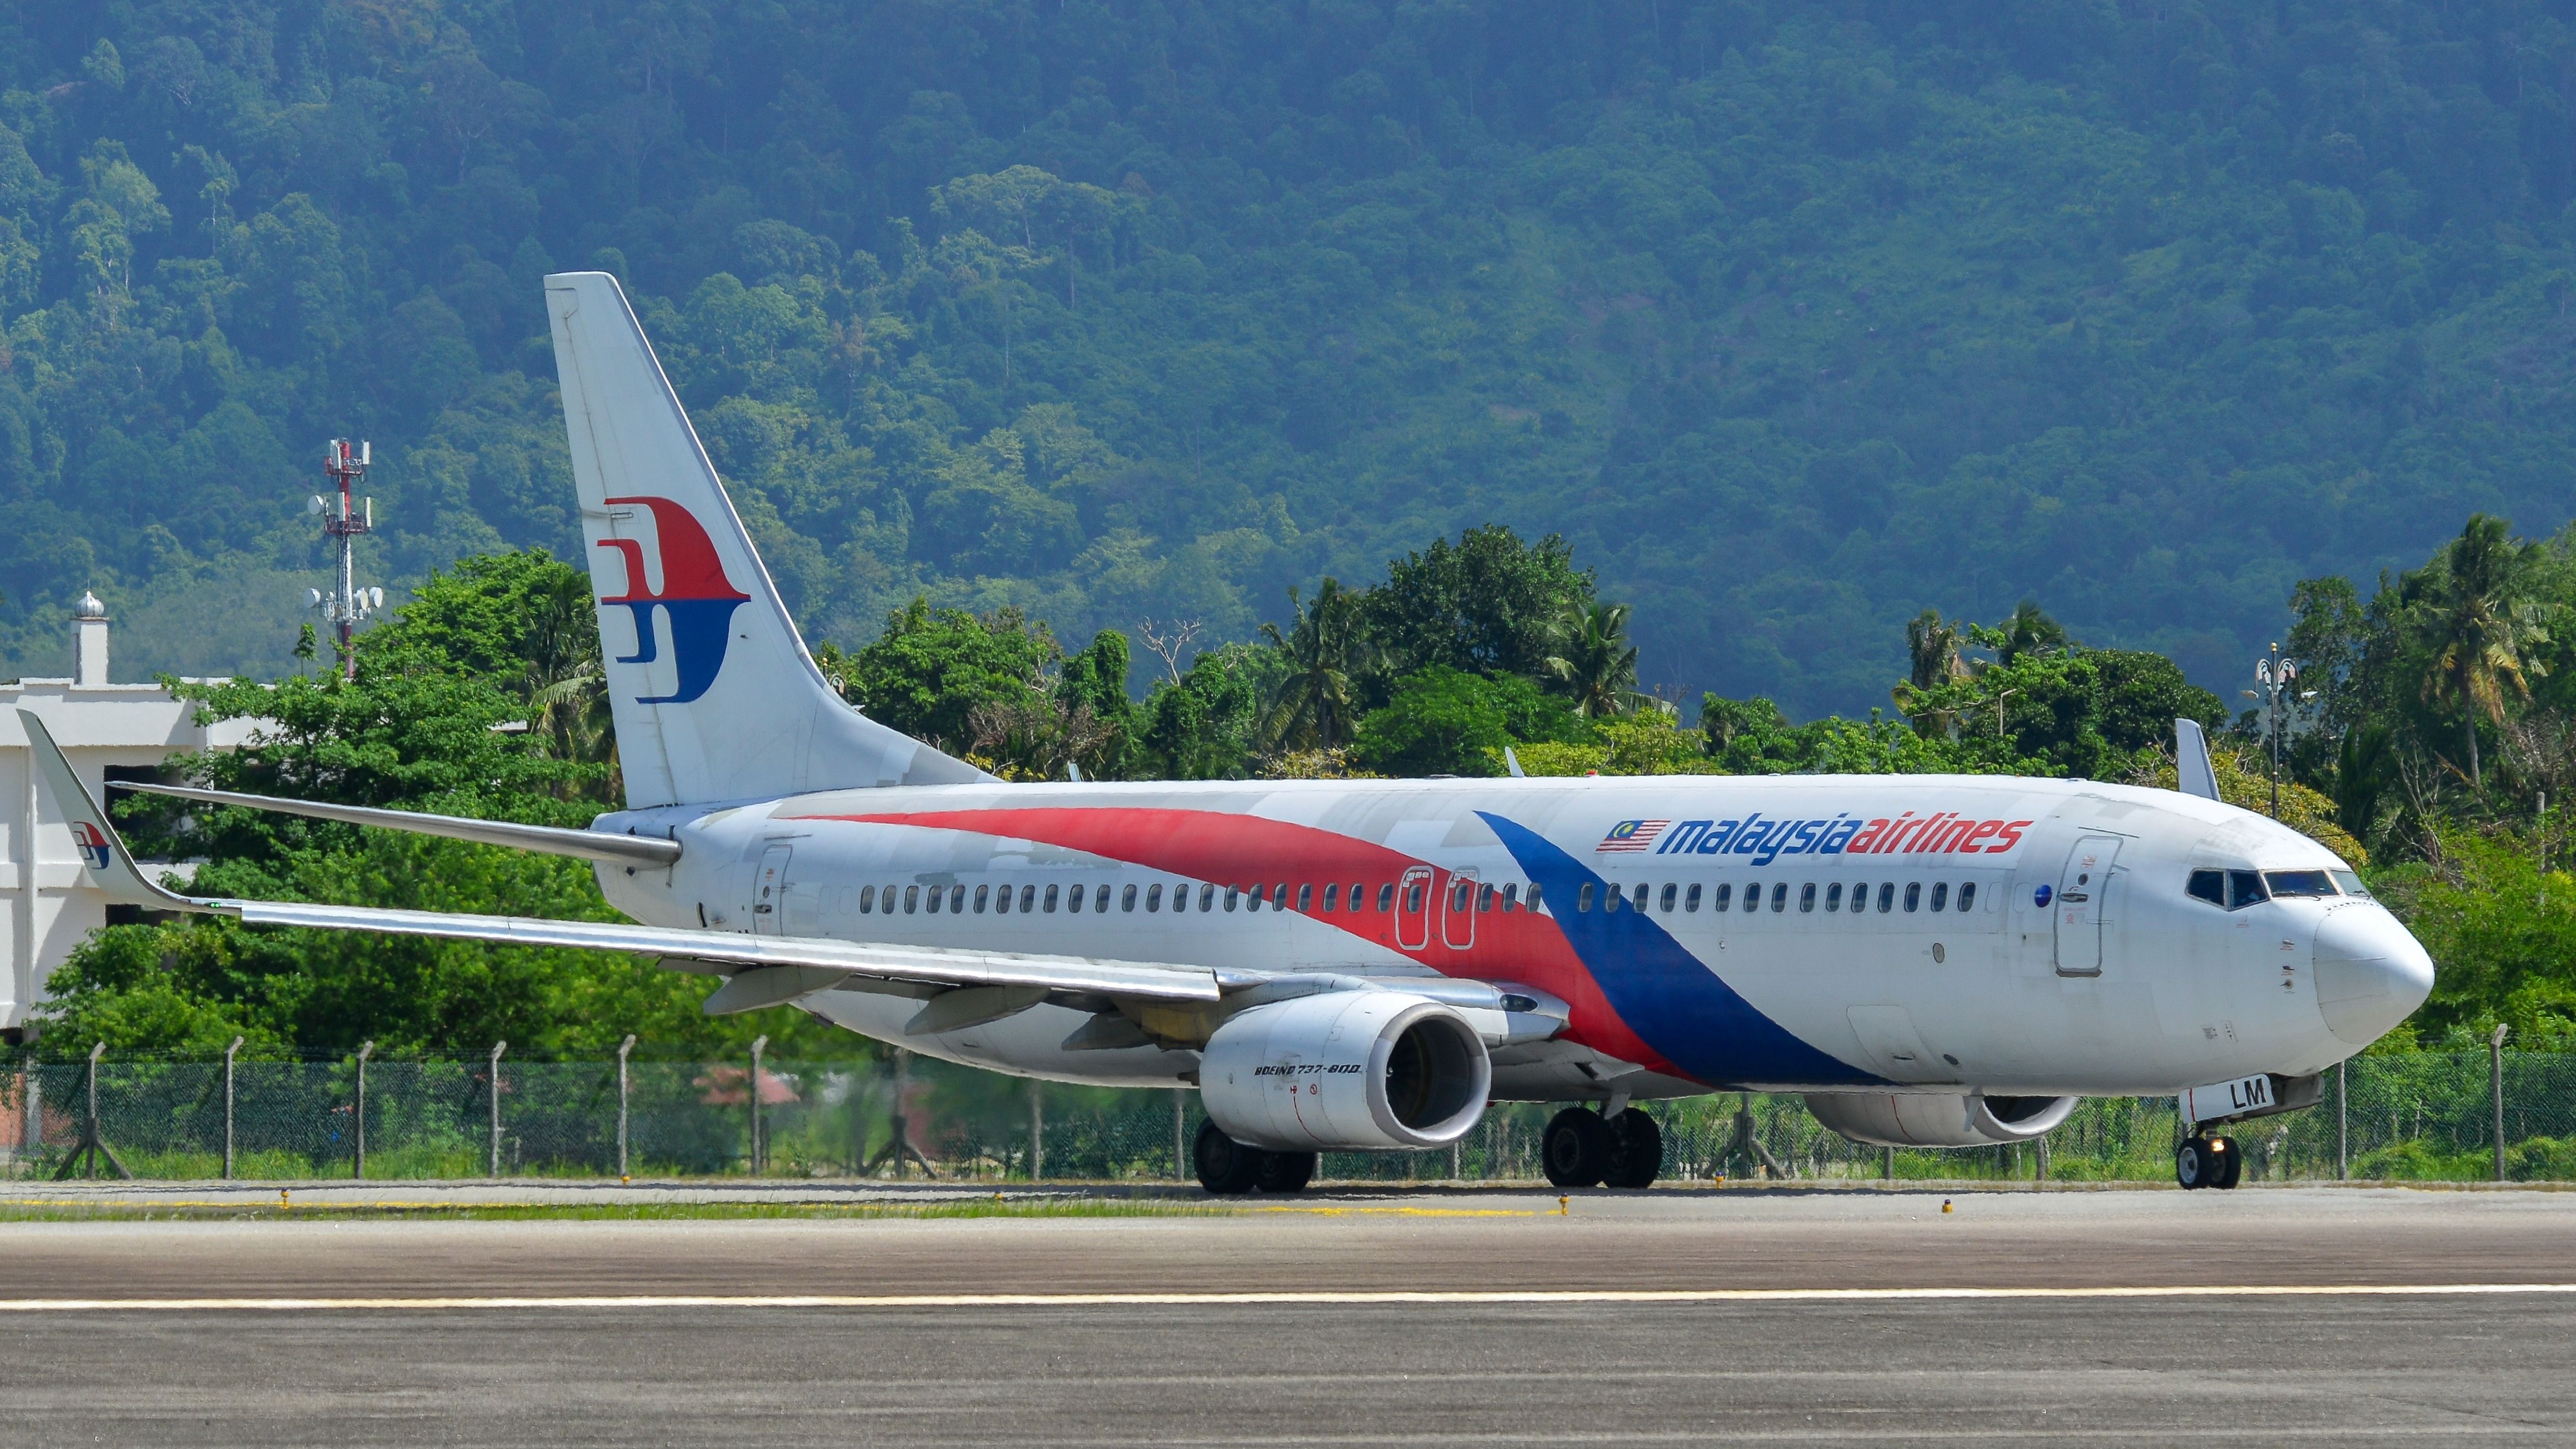 Malaysia Airlines Boeing 737-800 taxiing for takeoff from Langkawi Airport.